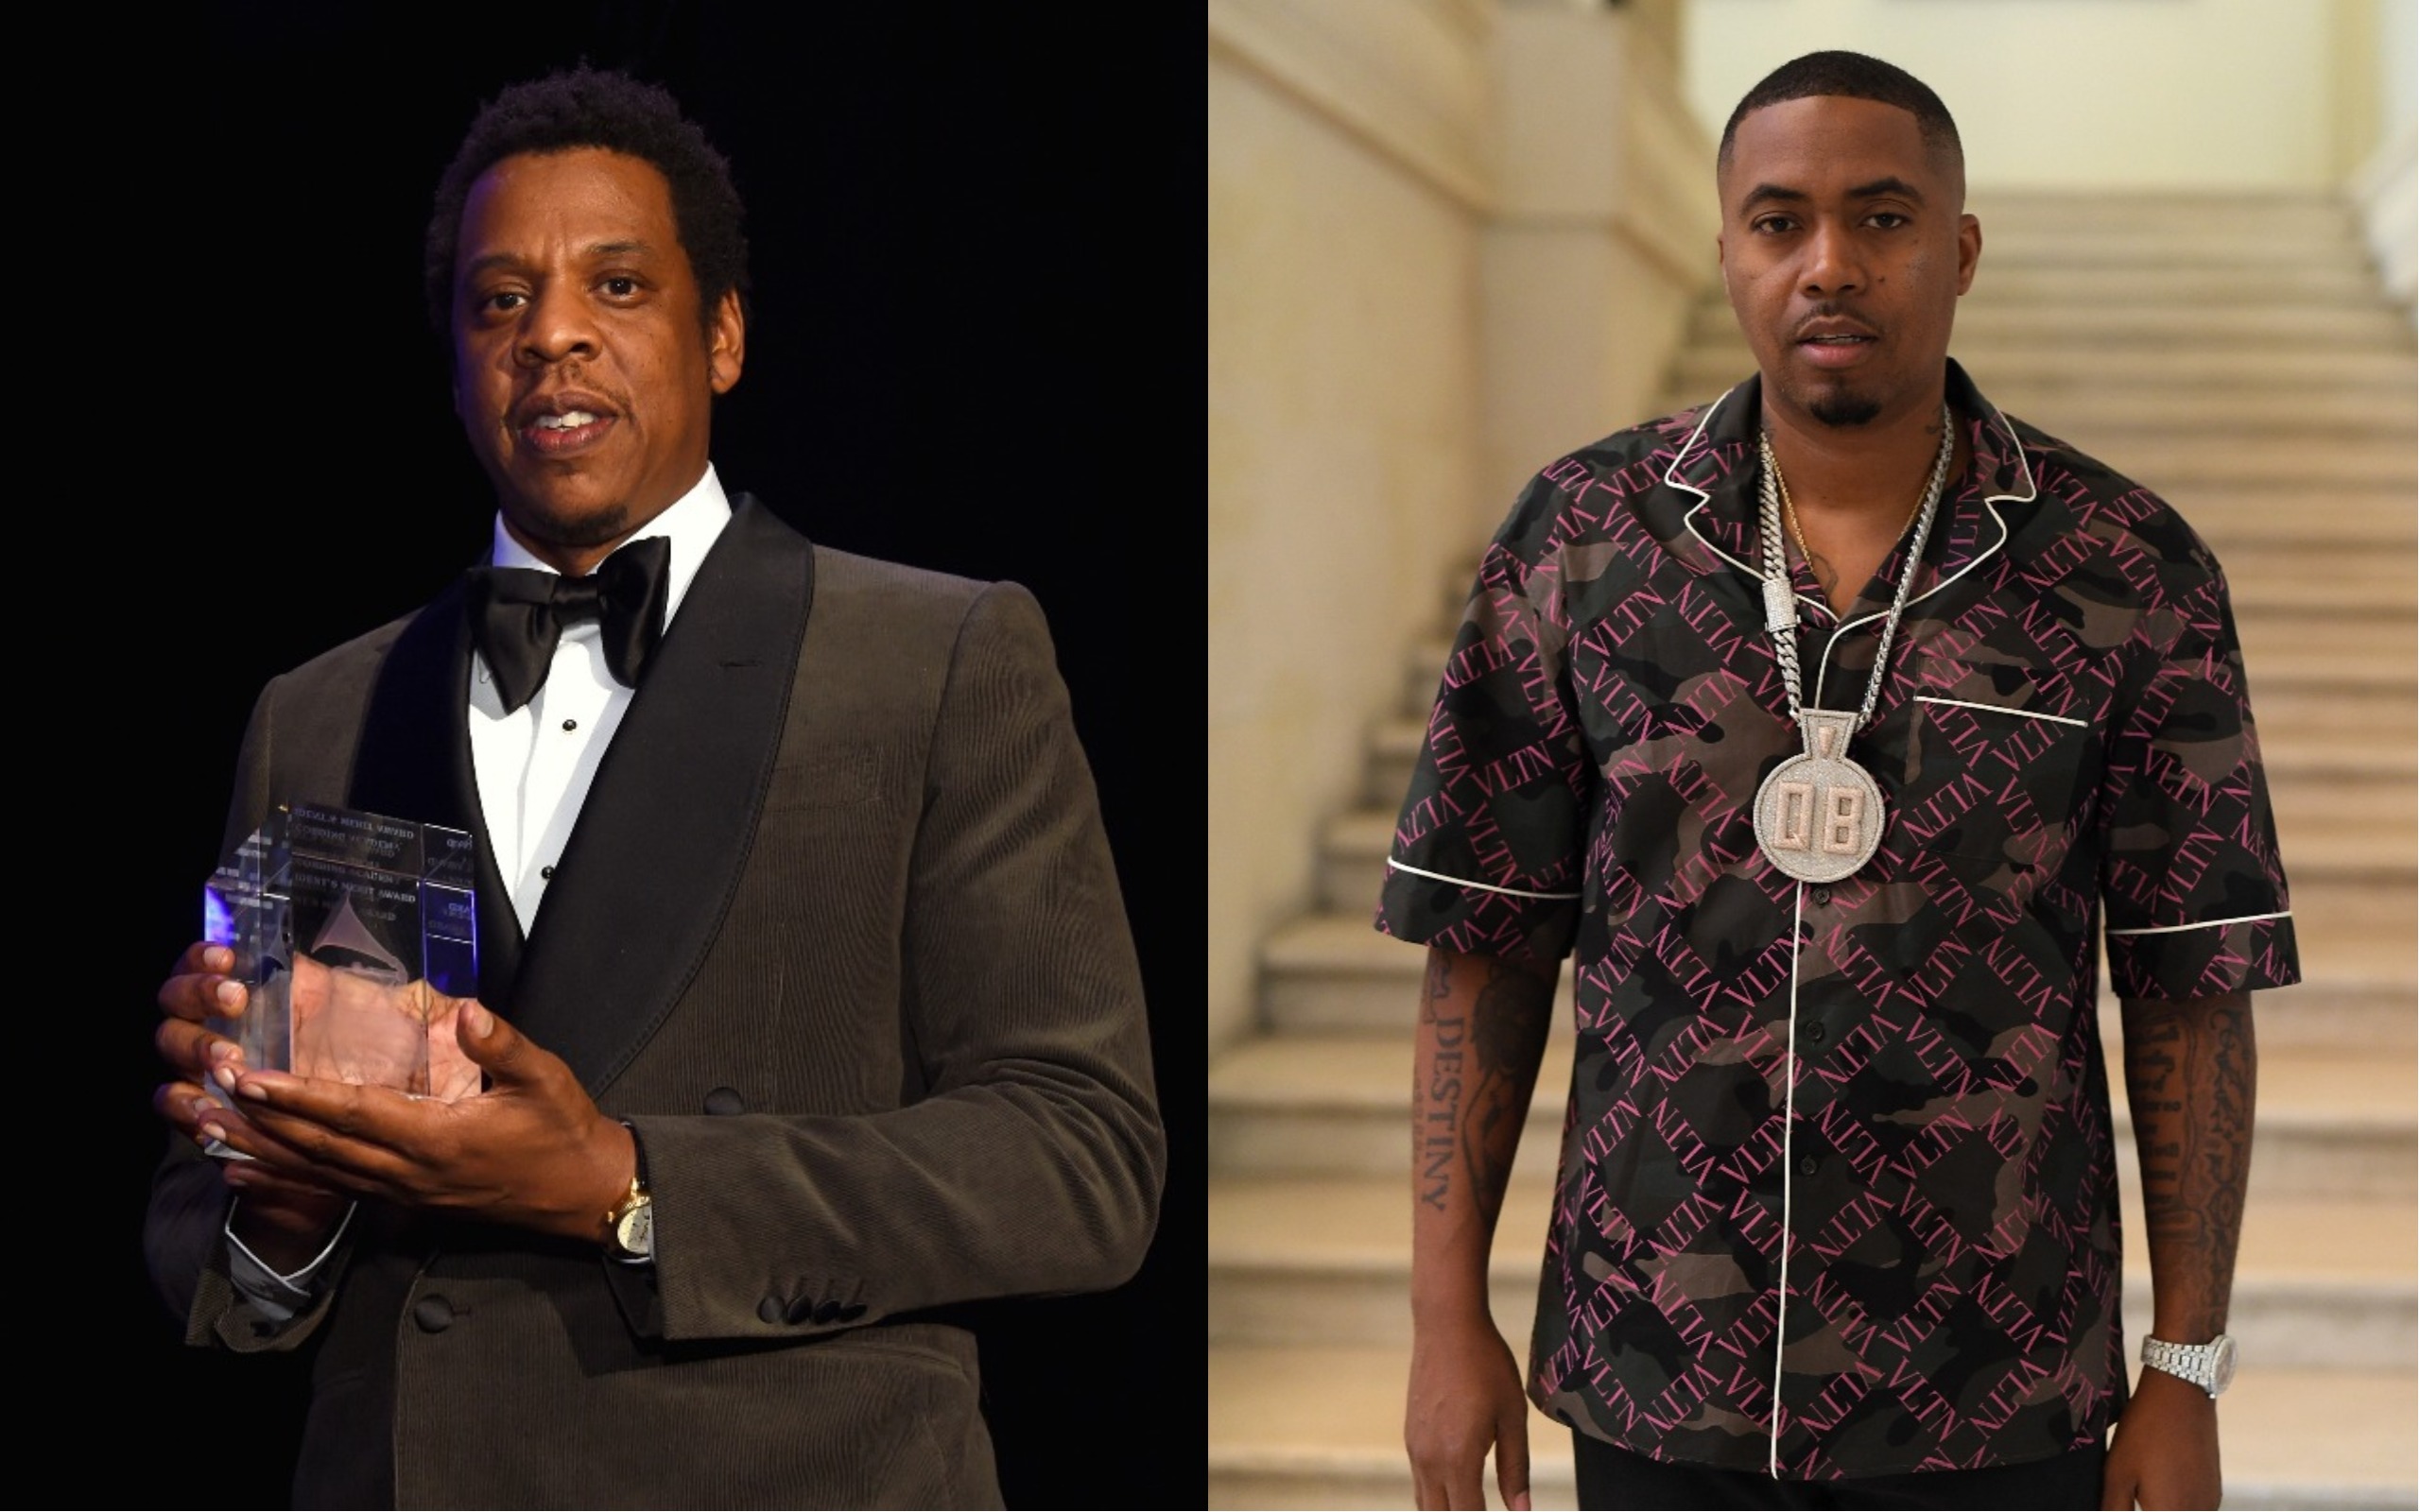 Takeover Vs. Ether: Revisiting The Jay-Z & Nas Beef